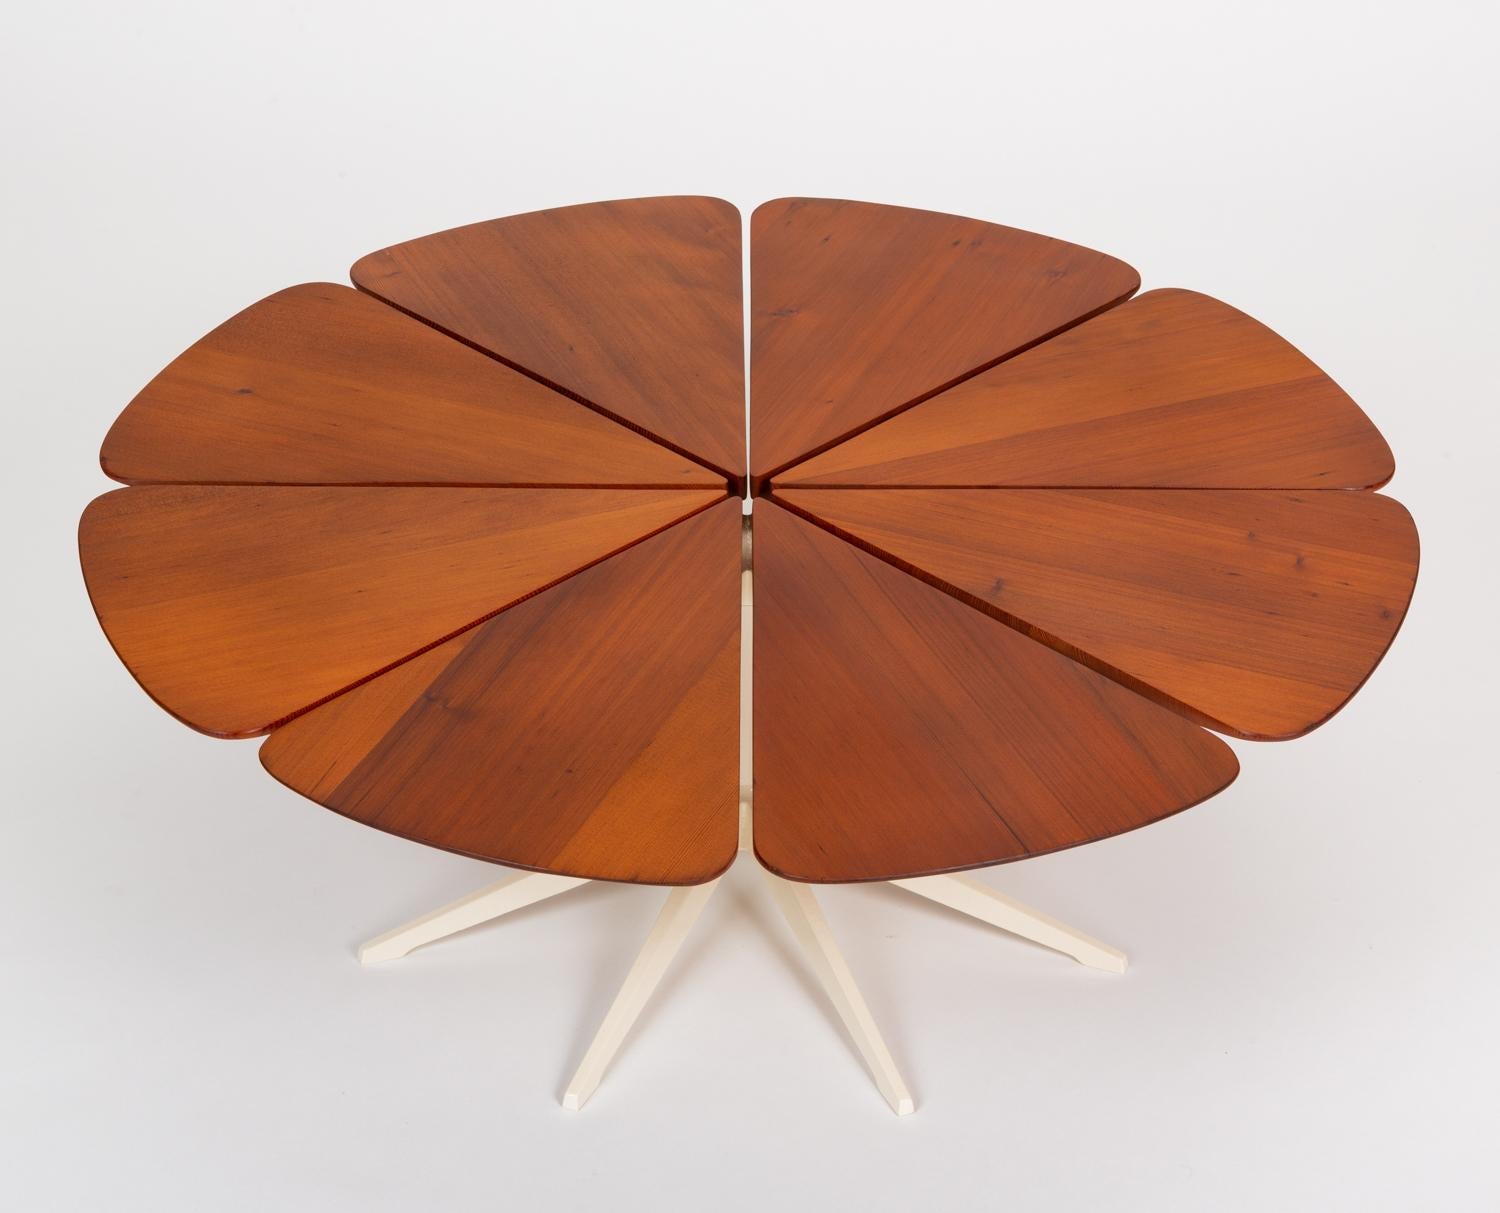 American Petal Collection Coffee Table by Richard Schultz for Knoll